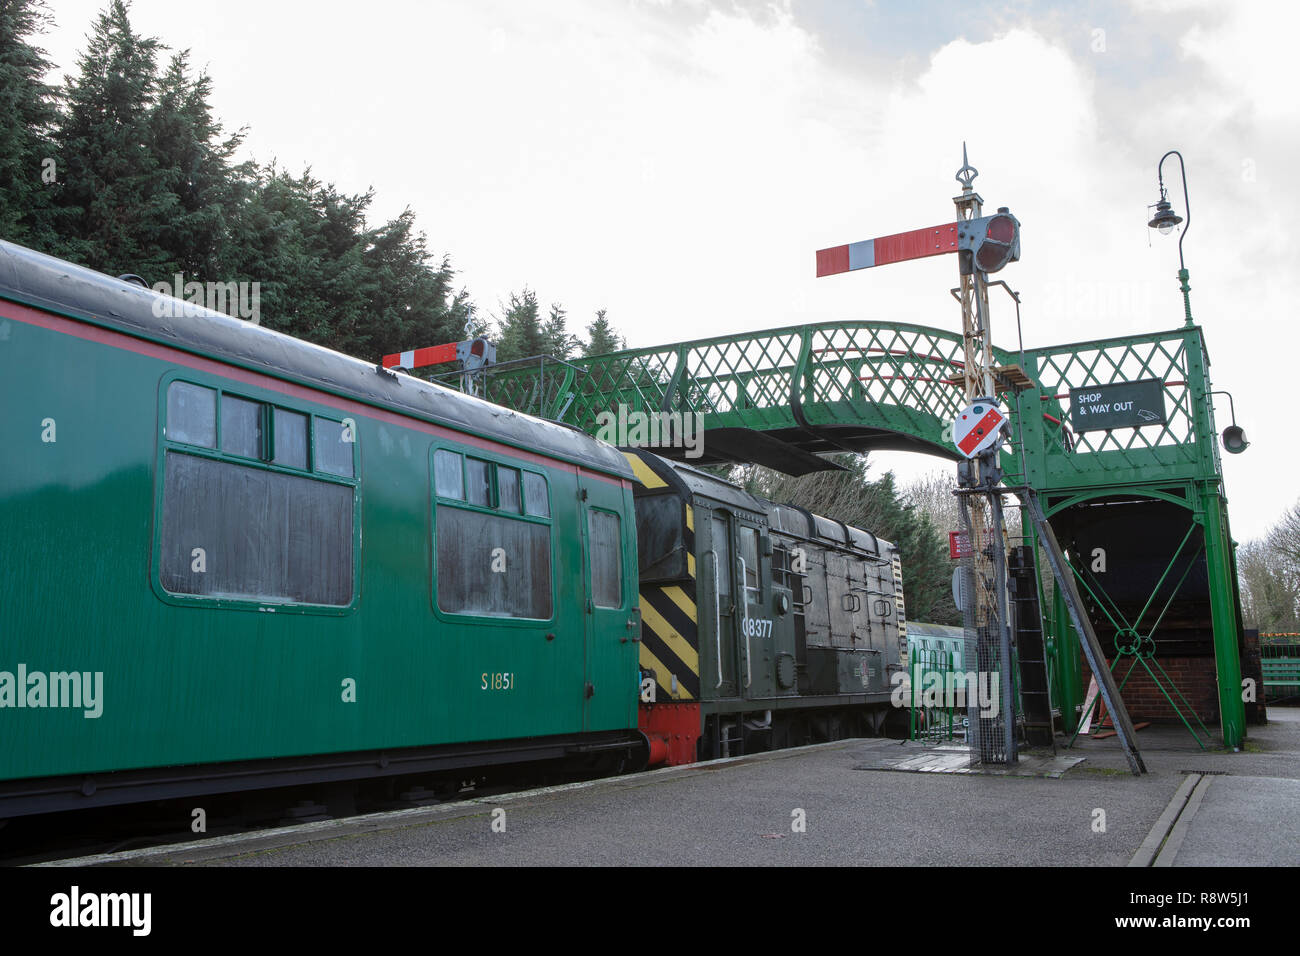 Low angle view of a diesel engine on retro railway. Rolling stock stopped at signal on a platform under a footbridge. Stock Photo